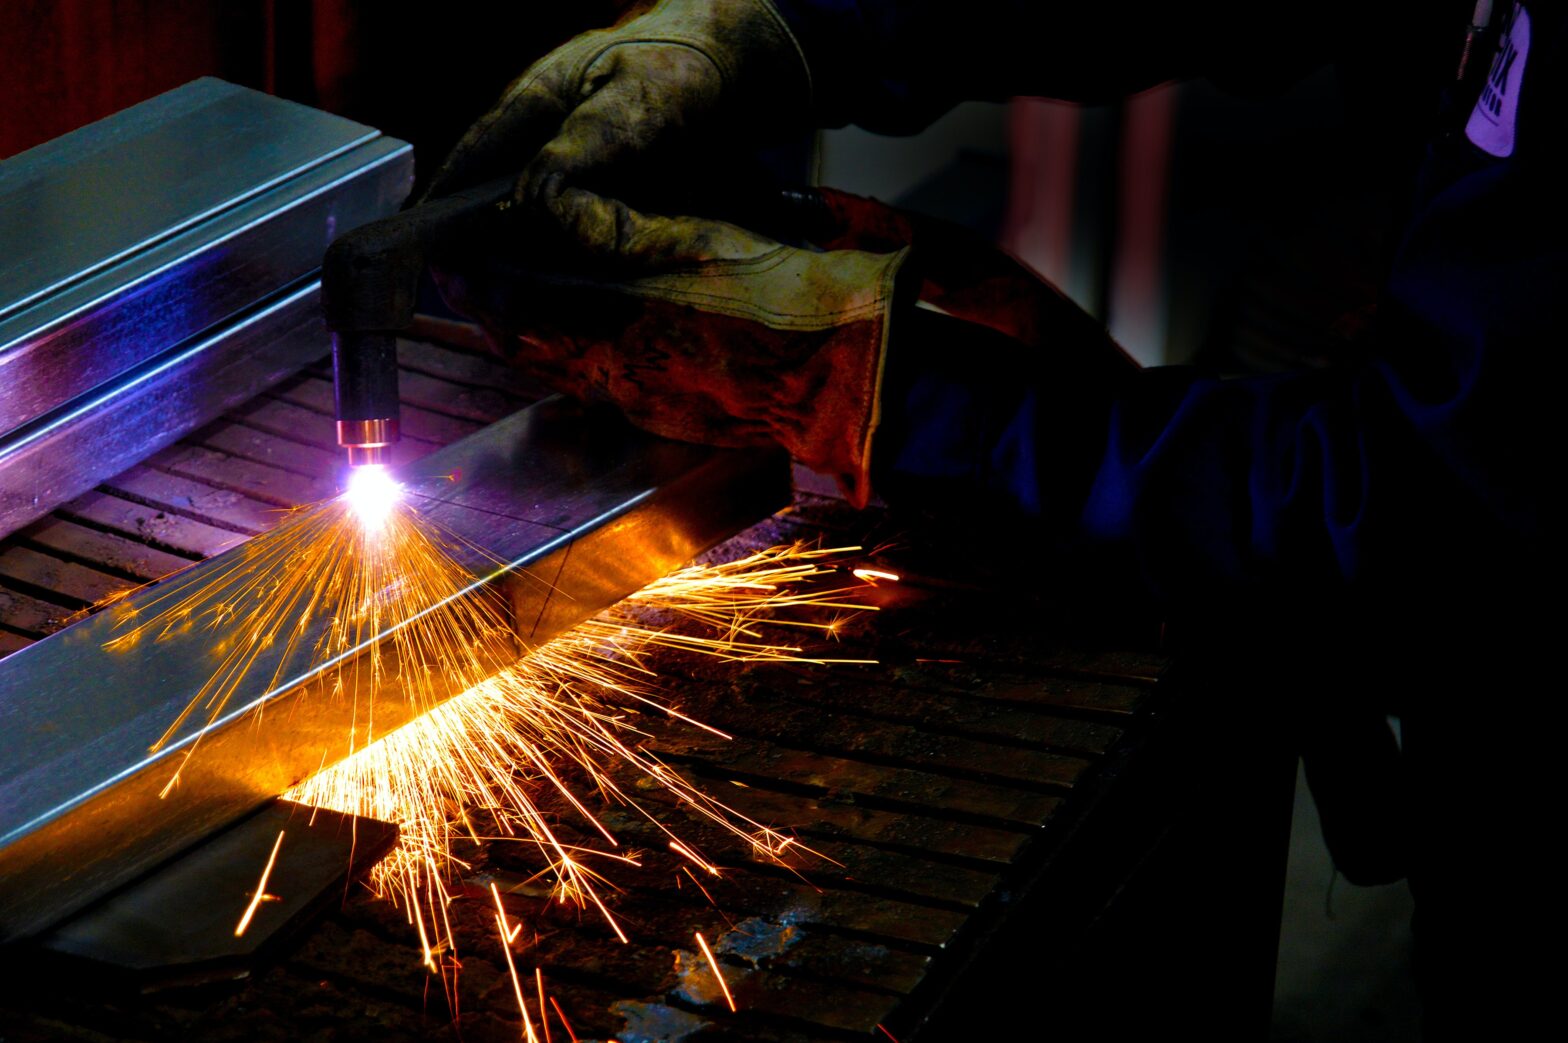 An image of a worker wearing protective clothing using a plasma cutter to cut metal